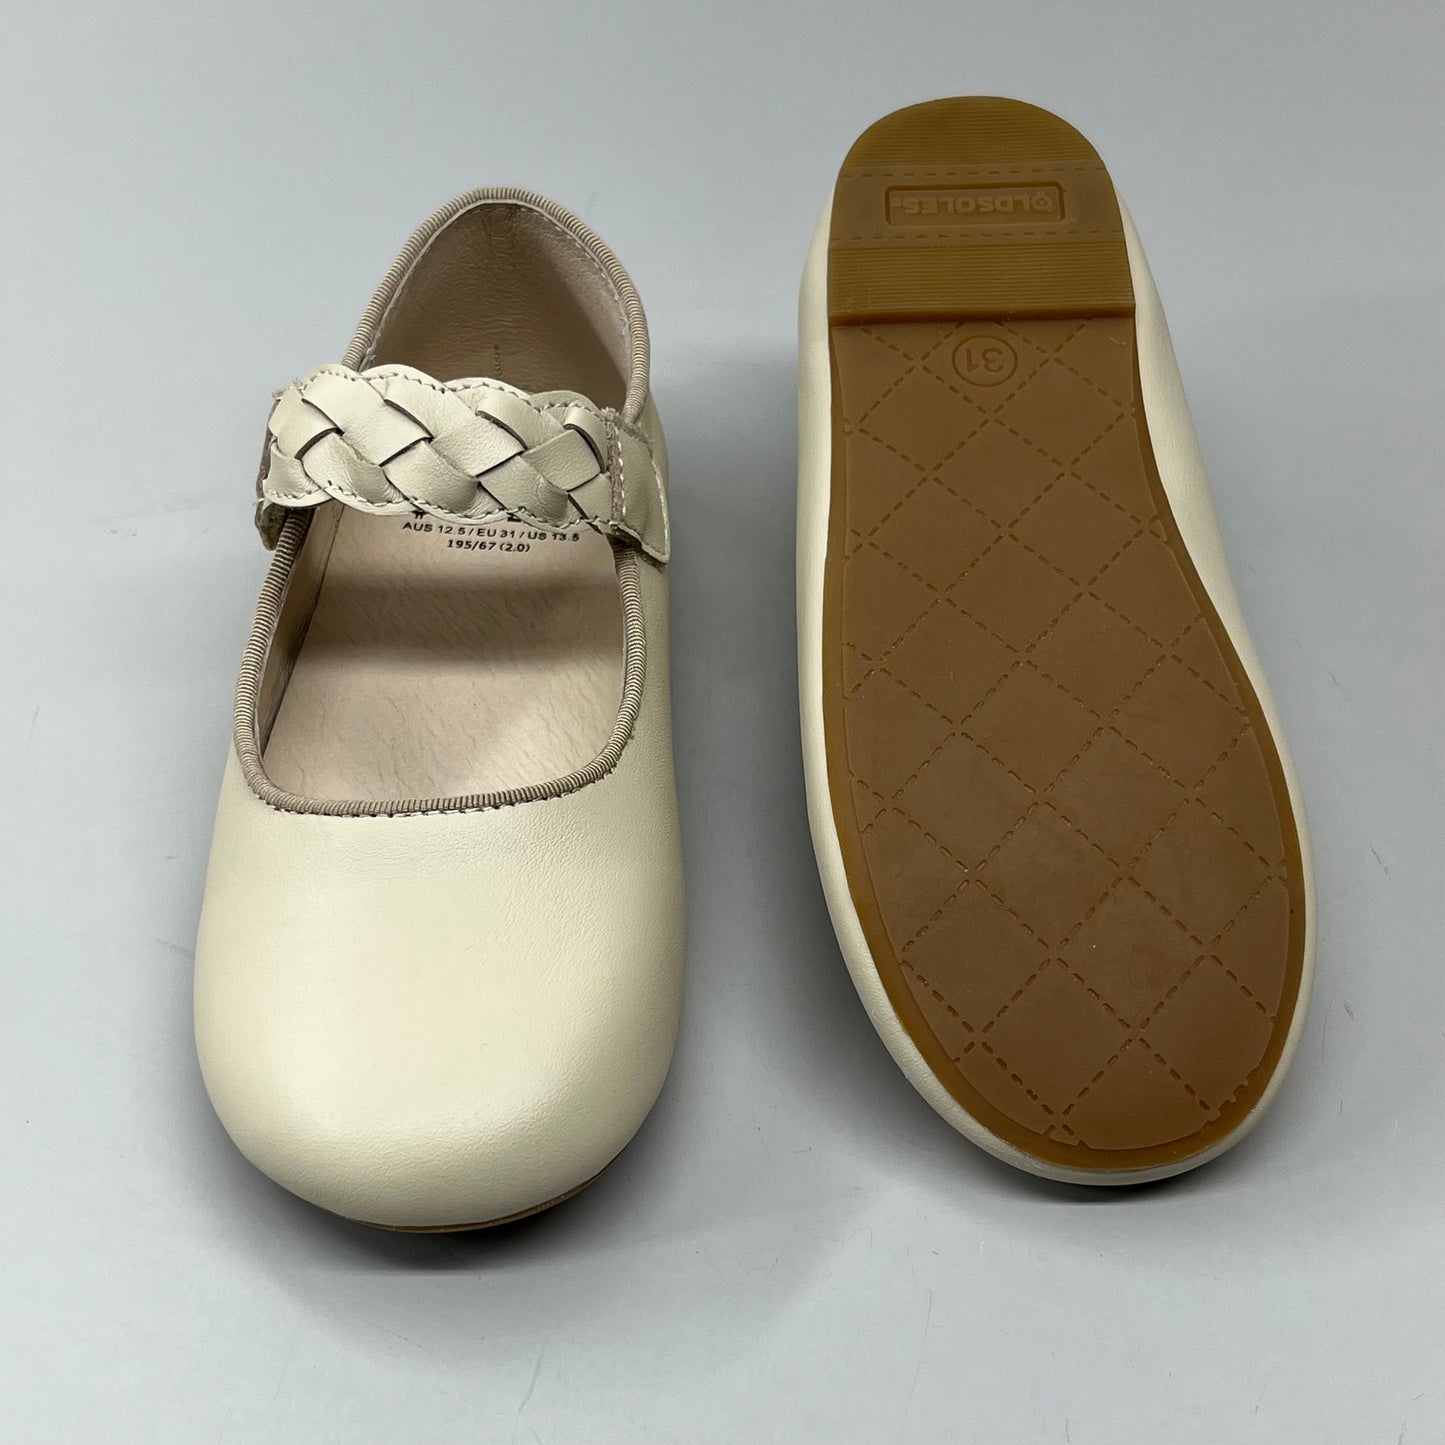 OLD SOLES Lady Plat Braided Strap Leather Shoe Kid’s Sz 31 US 13.5 Cream #817